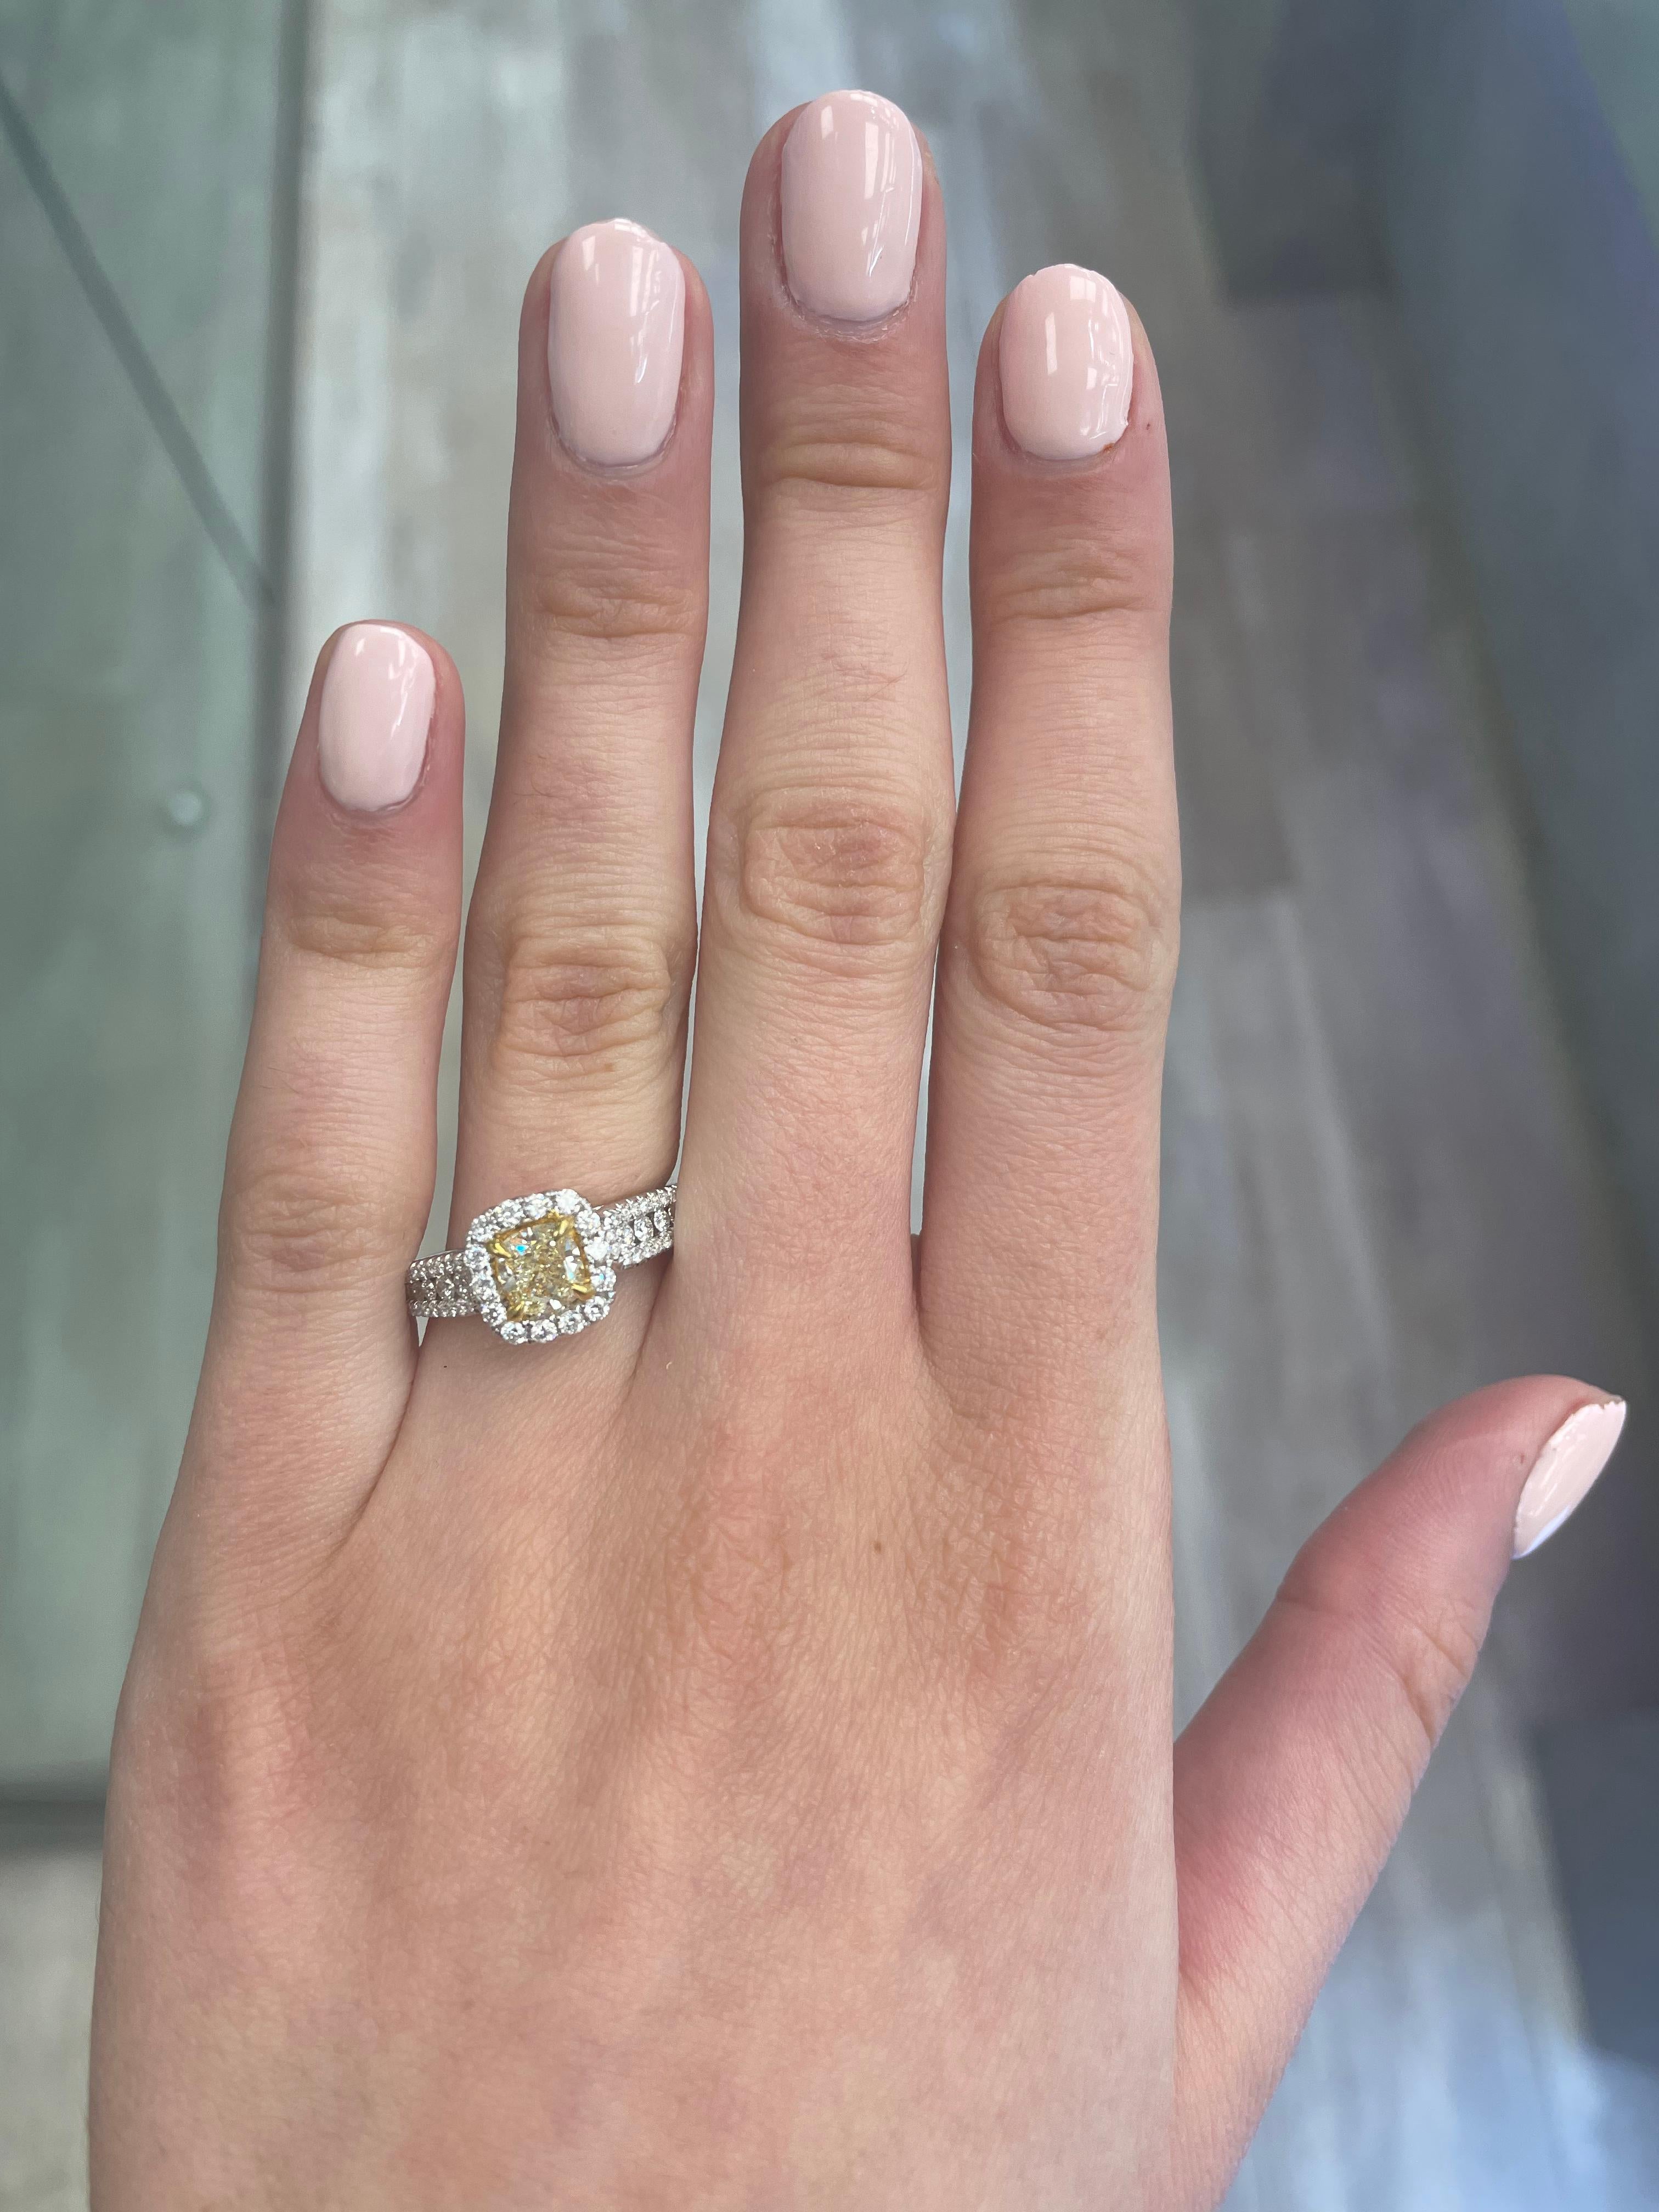 Stunning modern EGL certified yellow diamond with halo ring, two-tone 18k yellow and white gold, split shank. By Alexander Beverly Hills
1.47 carats total diamond weight.
0.91 carat cushion cut Fancy Yellow color and VS1 clarity diamond, EGL graded.